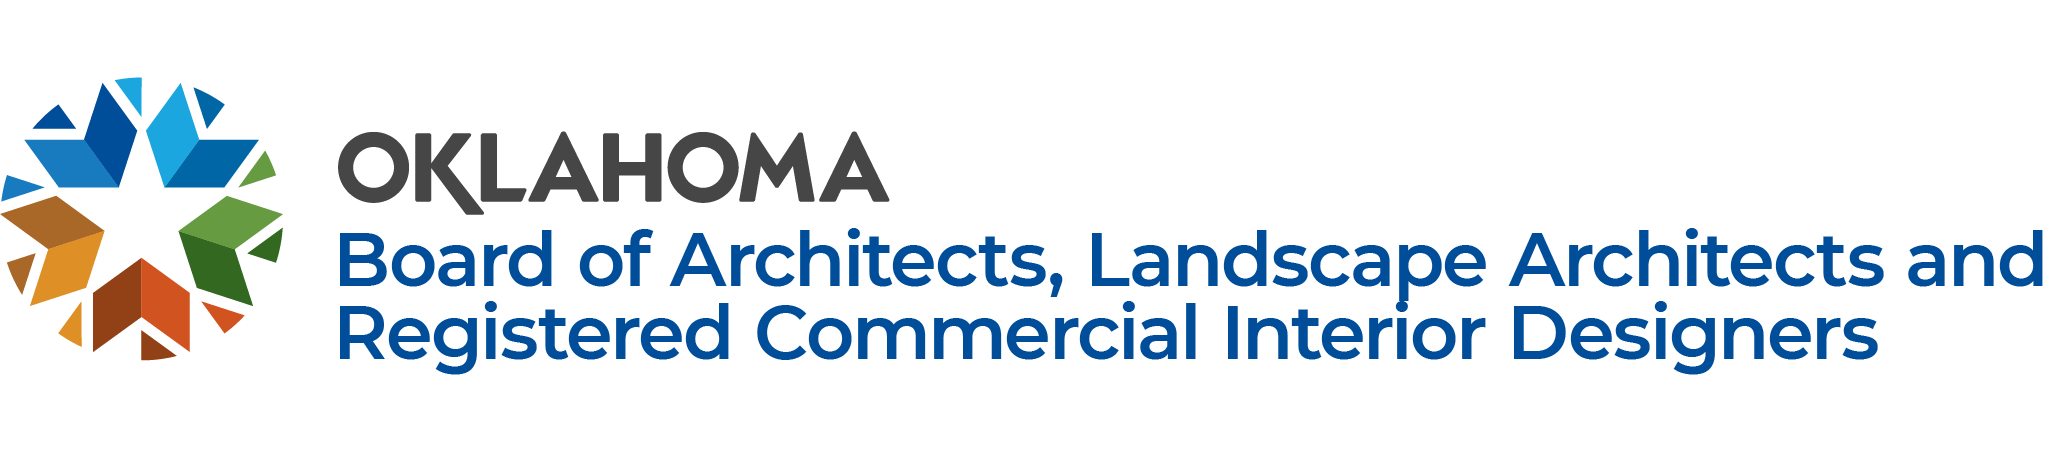 Oklahoma Board of Architects, Landscape Architects, Registered Commercial Interior Designers